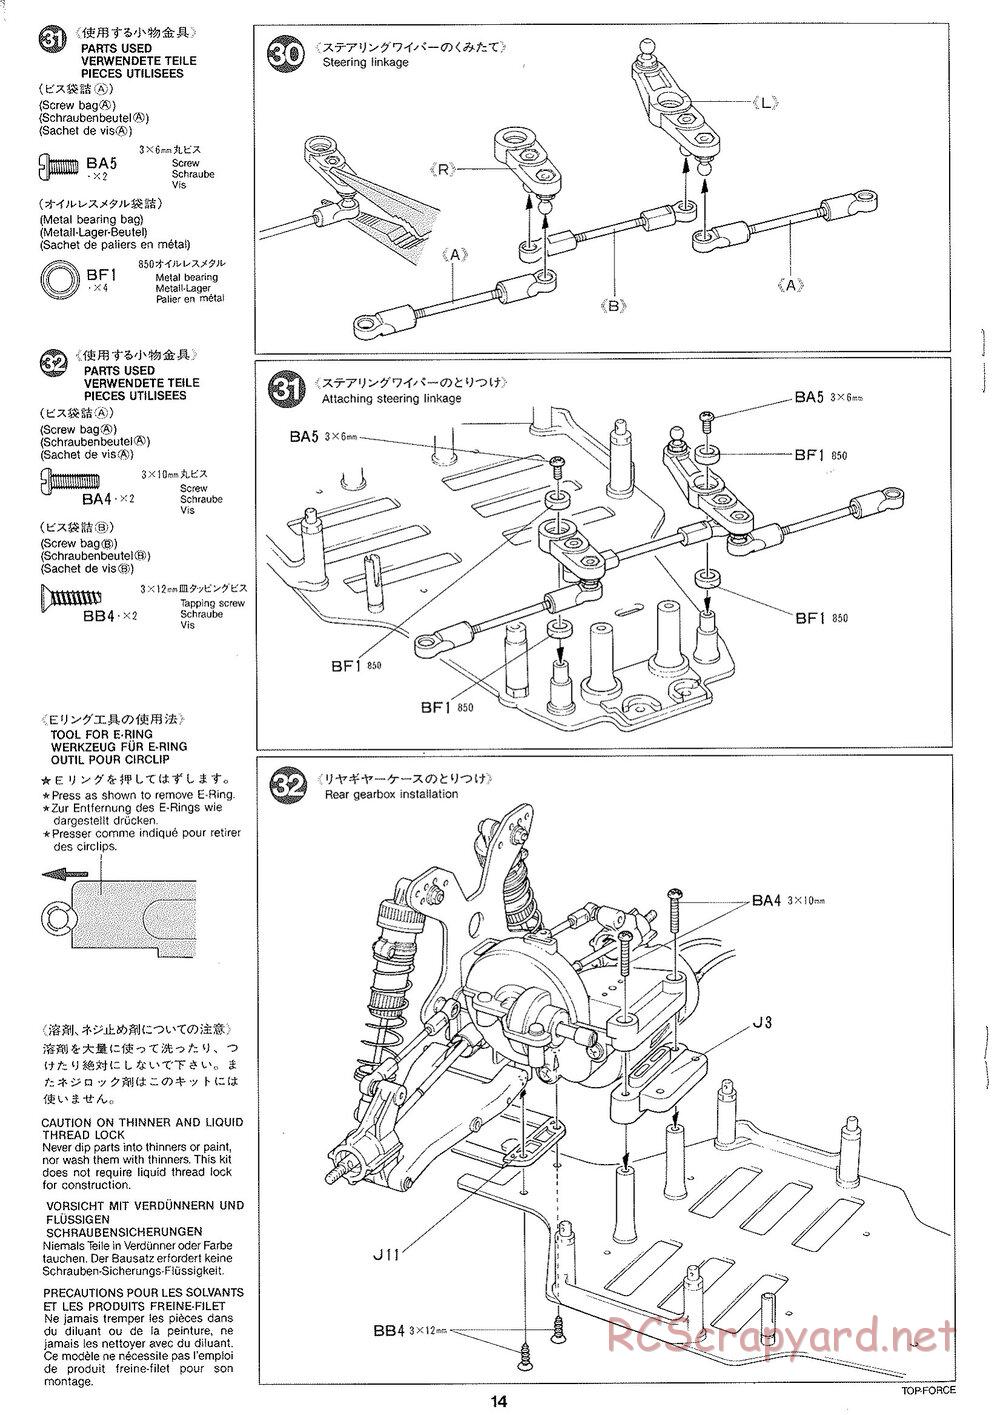 Tamiya - Top Force 2005 - DF-01 Chassis - Manual - Page 14